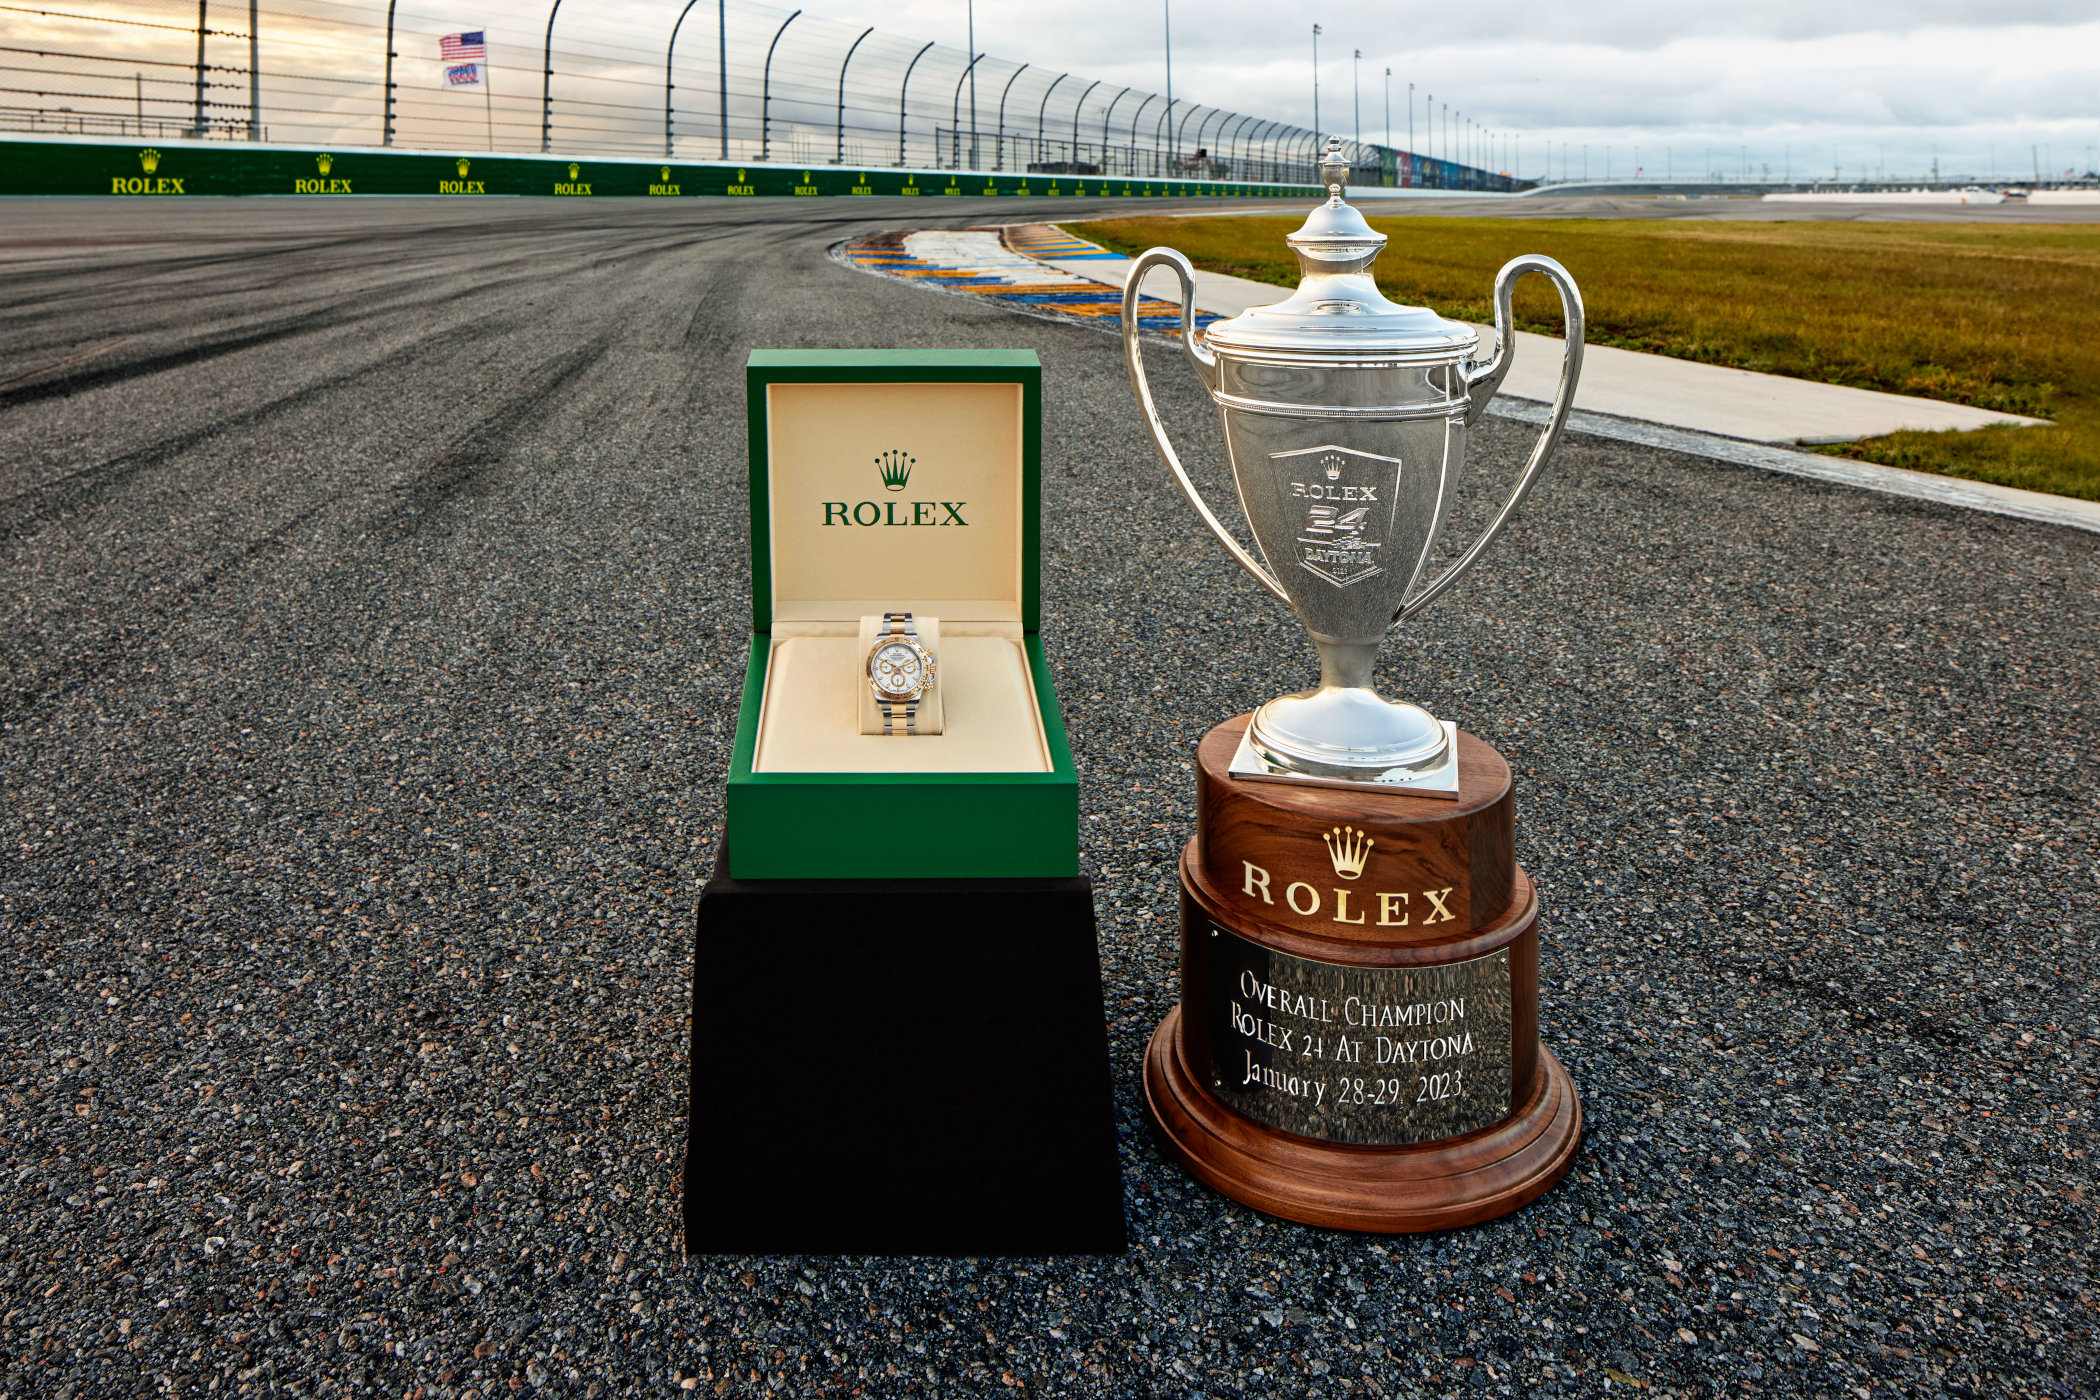 Rolex 24 at Daytona - The trophy and the watch - 1